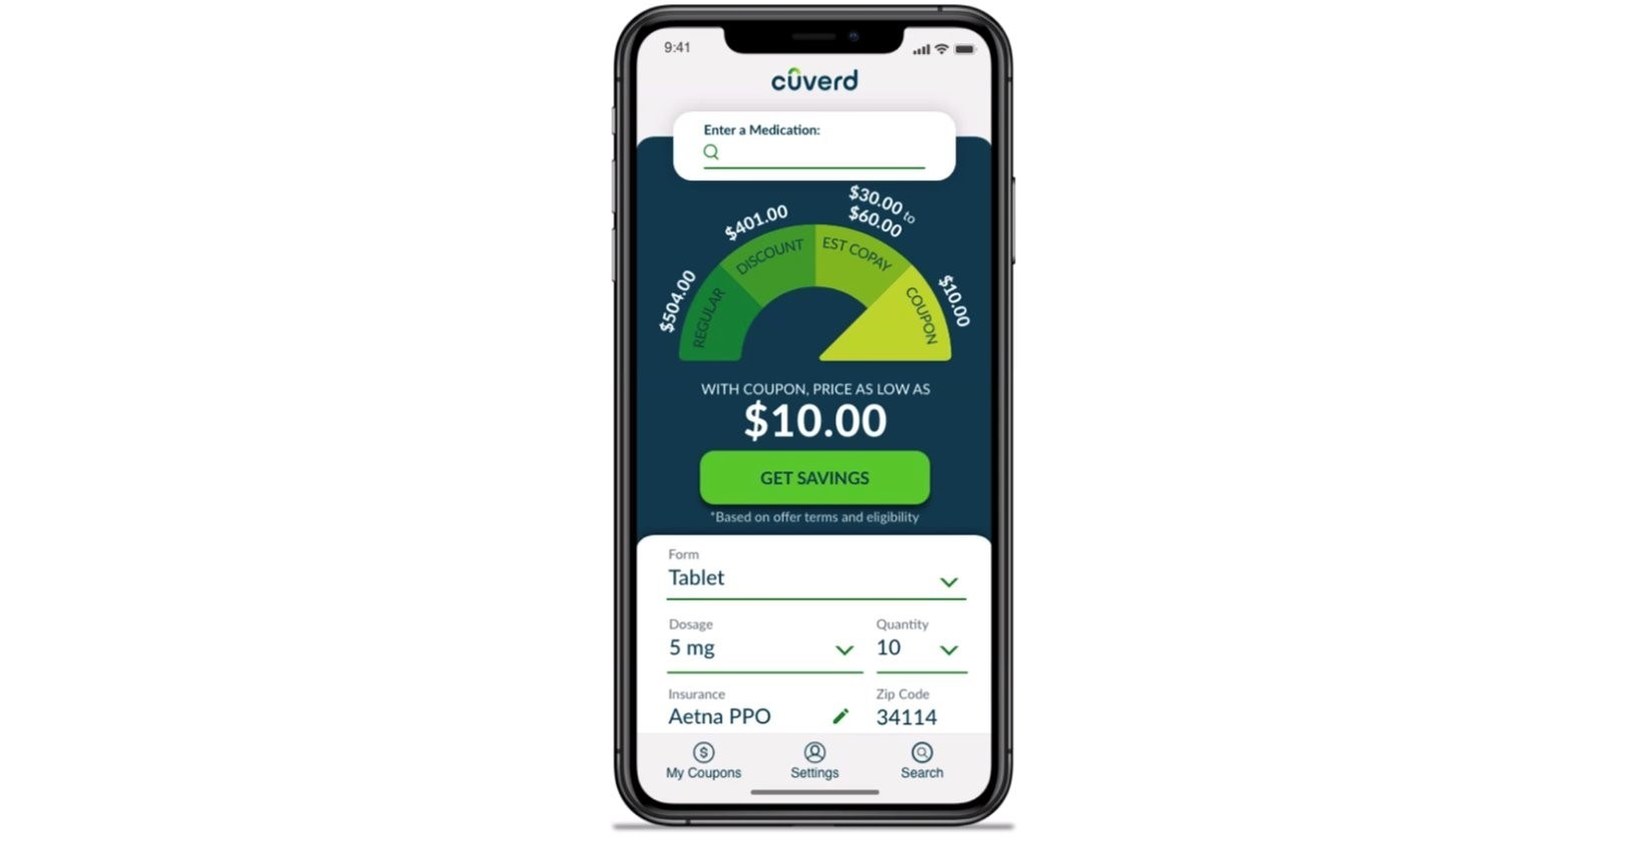 CUVERD™, THE NEXT-GENERATION PRESCRIPTION SAVINGS PLATFORM, OFFERS PHARMACEUTICAL MANUFACTURERS A POWERFUL NEW INTEGRATED SOLUTION TO AMPLIFY ENROLLMENTS INTO PATIENT COPAY SAVINGS AND SUPPO